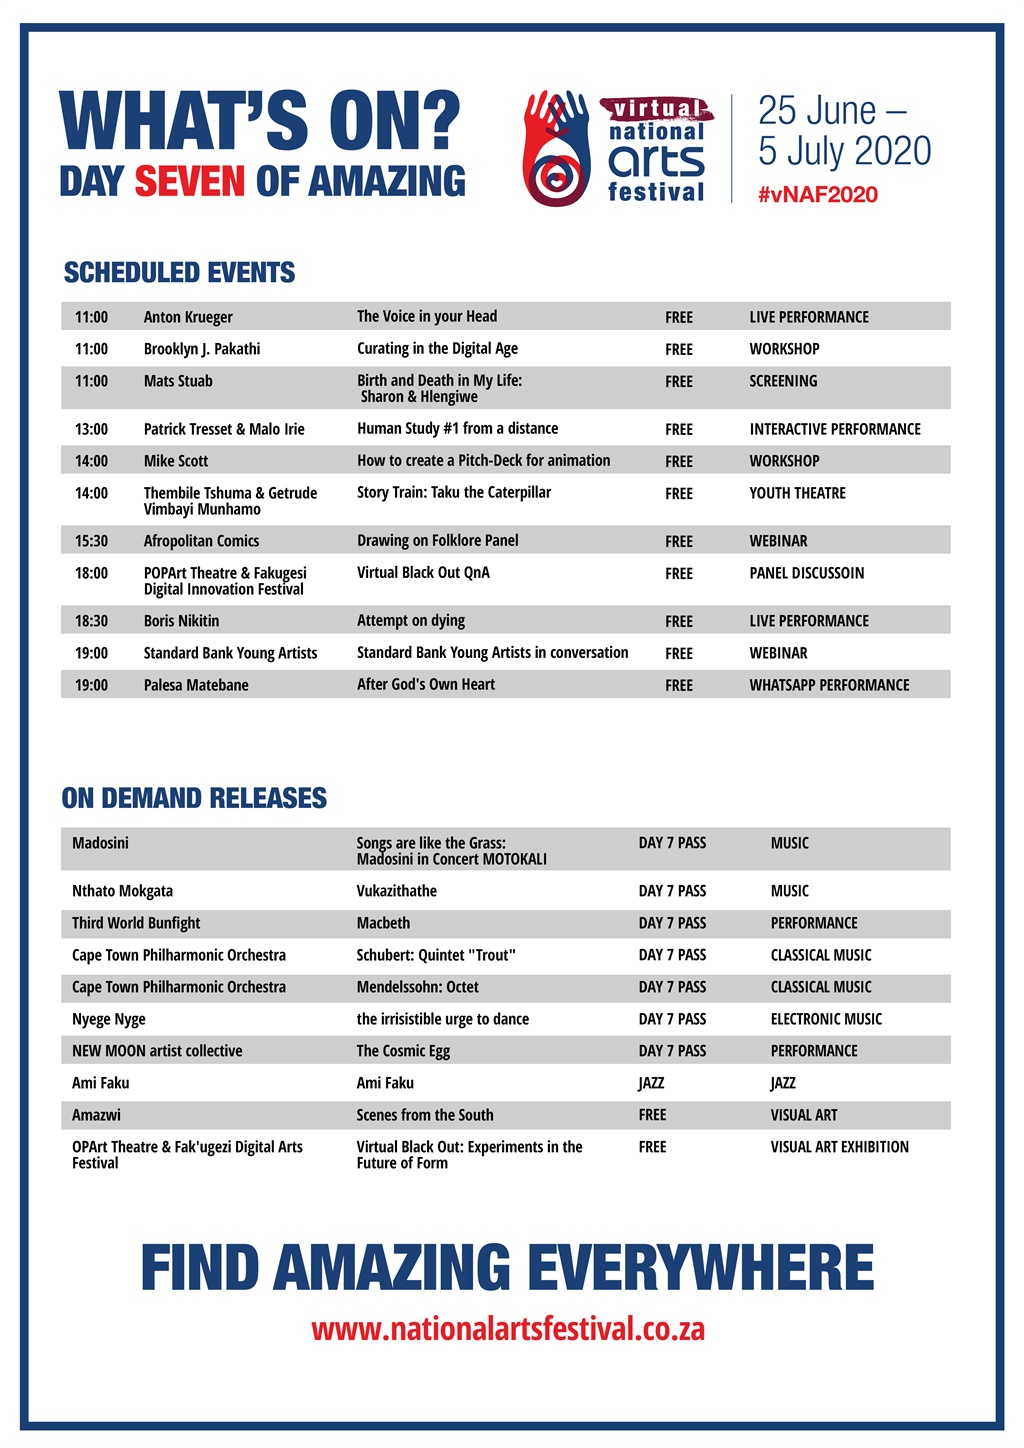 Day 7 programme of the National Arts Festival